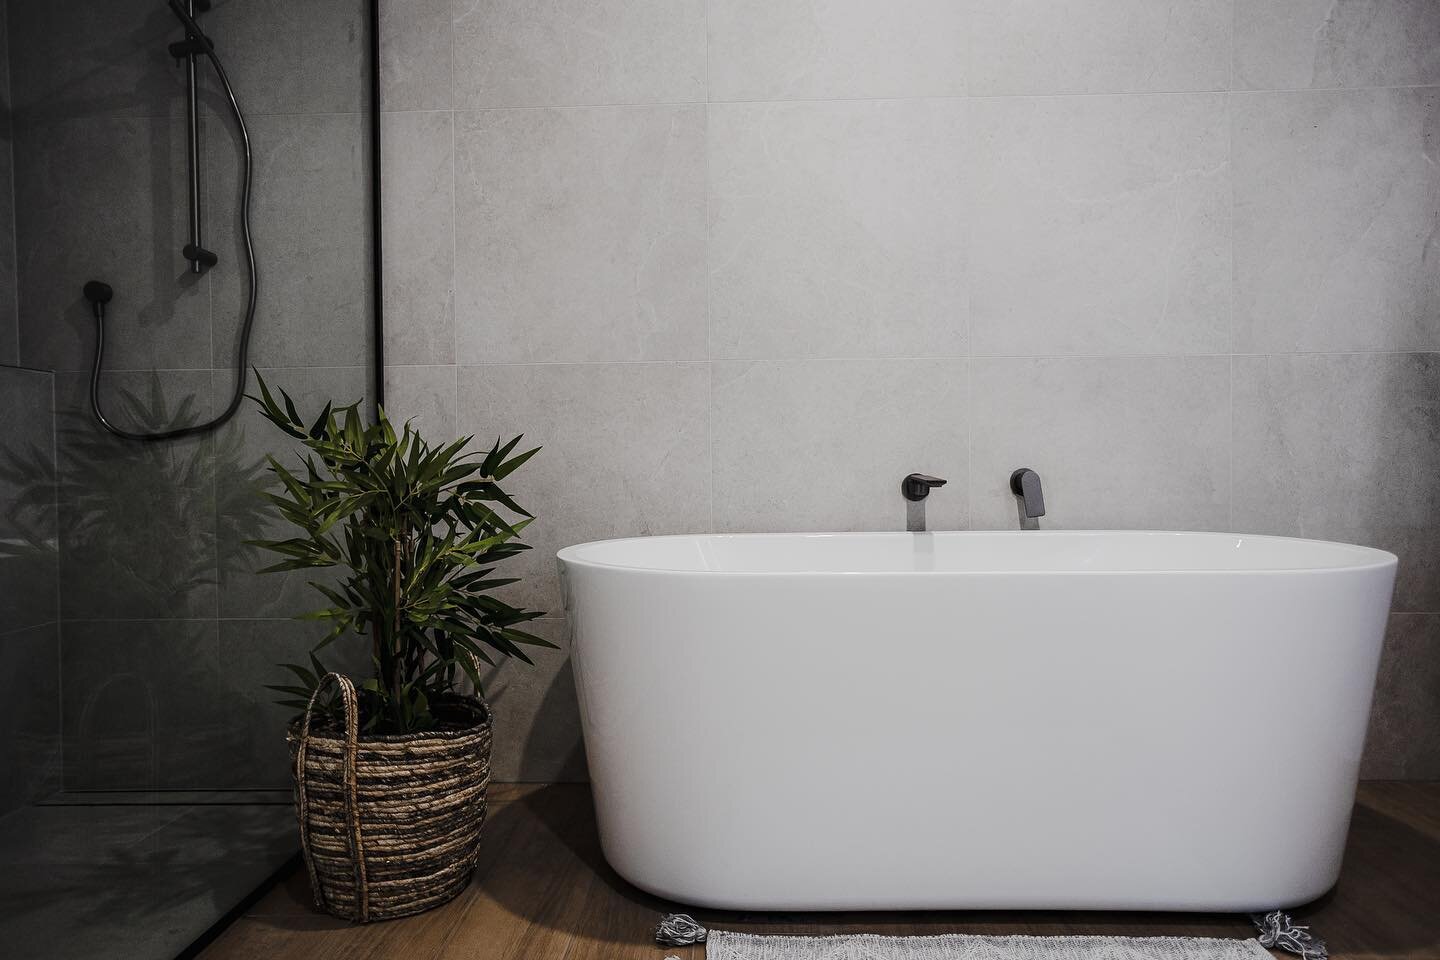 Introducing the stunning centerpiece of this bathroom - the bathtub! Perfect for ultimate relaxation and unwinding after a long day. The large grey tiles on the walls and wood-look tiles on the floor give this bathroom a touch of sophistication and a